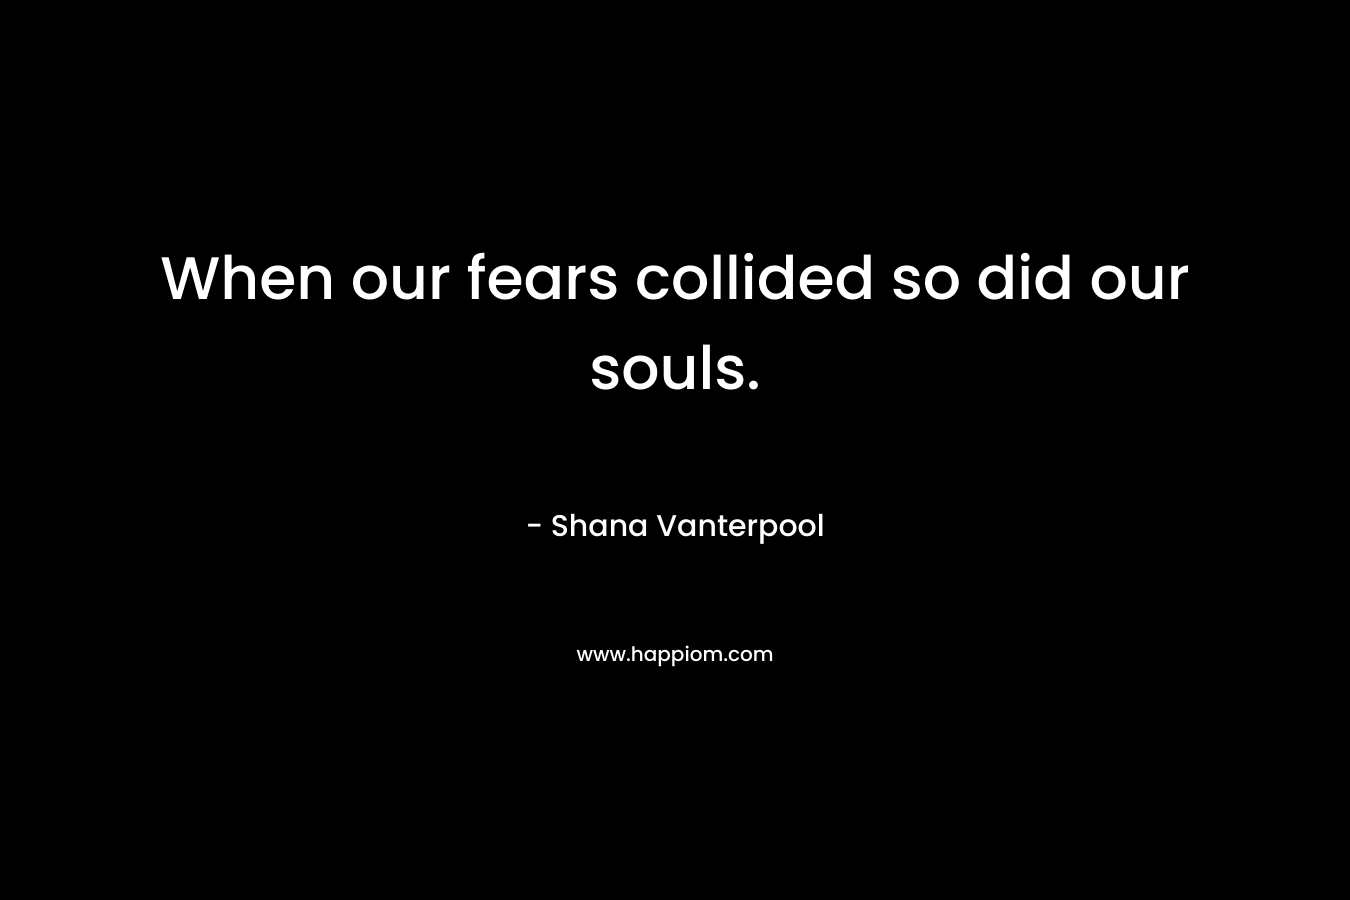 When our fears collided so did our souls.